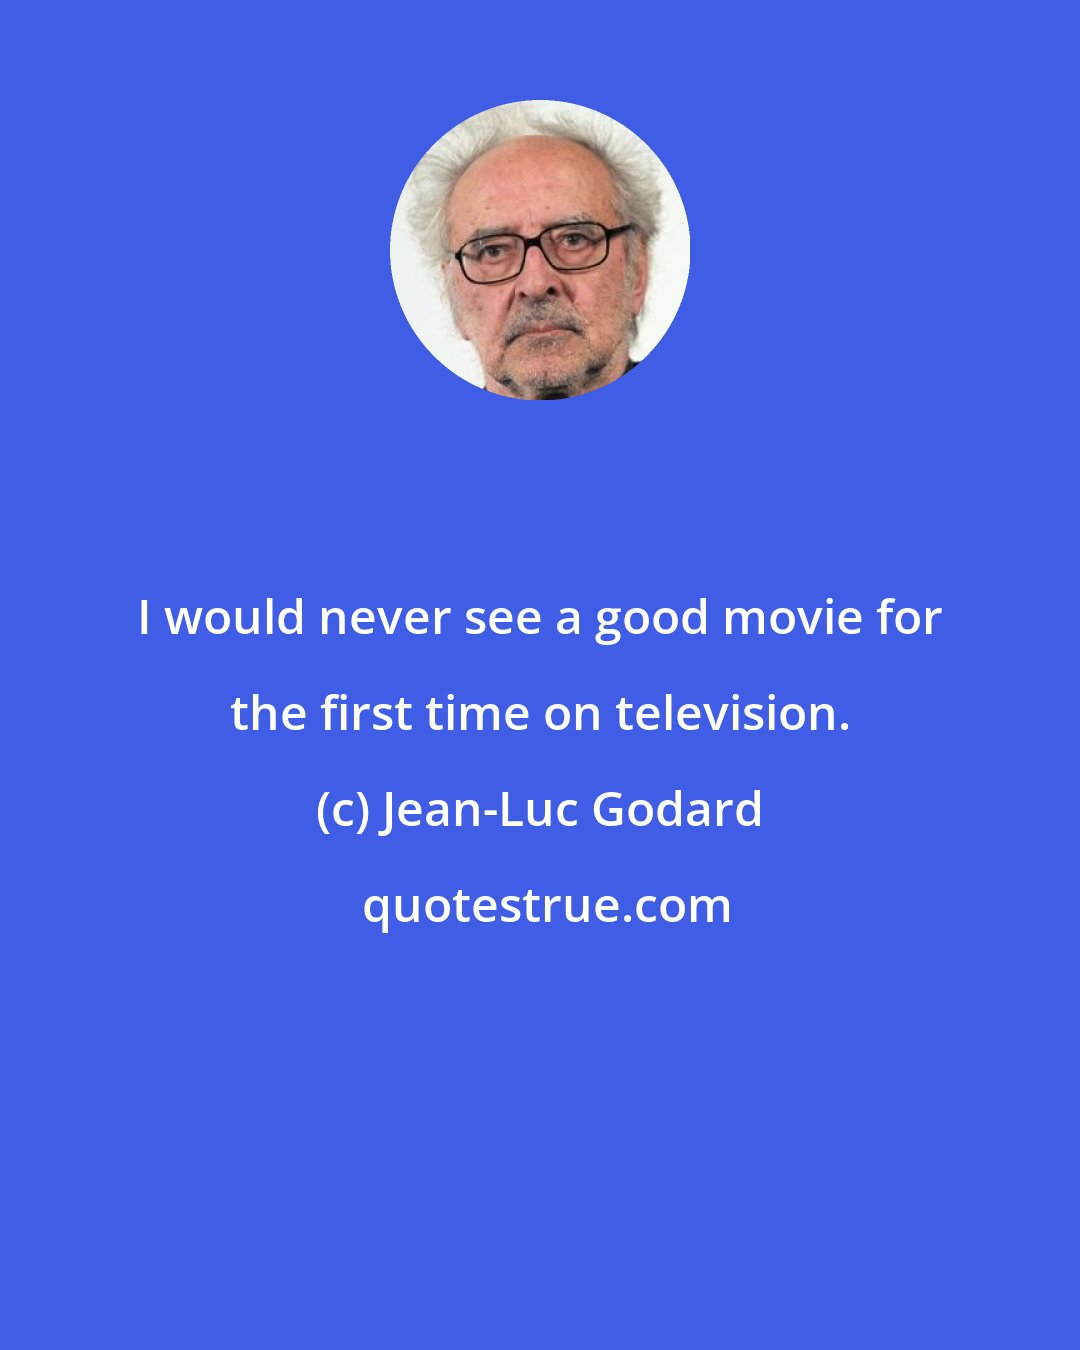 Jean-Luc Godard: I would never see a good movie for the first time on television.